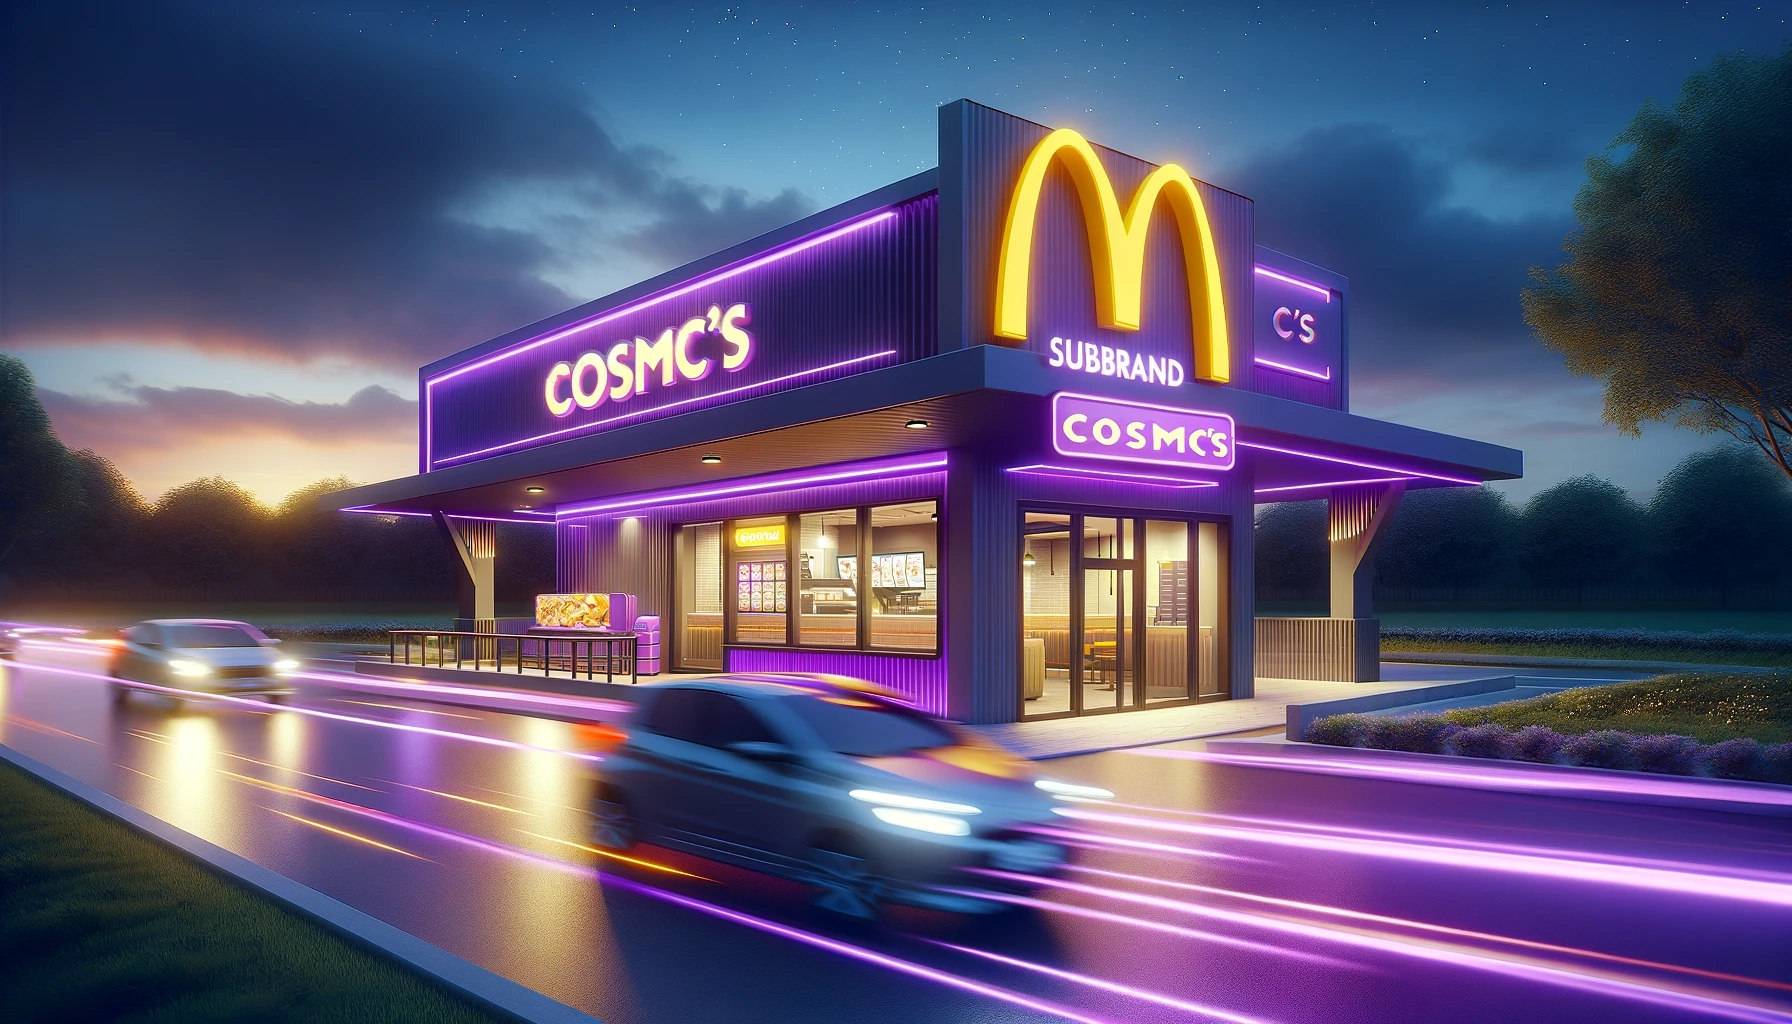 Fast Food Customers Want More Convenience and Unique Fare. McDonald’s Answers with CosMc’s.